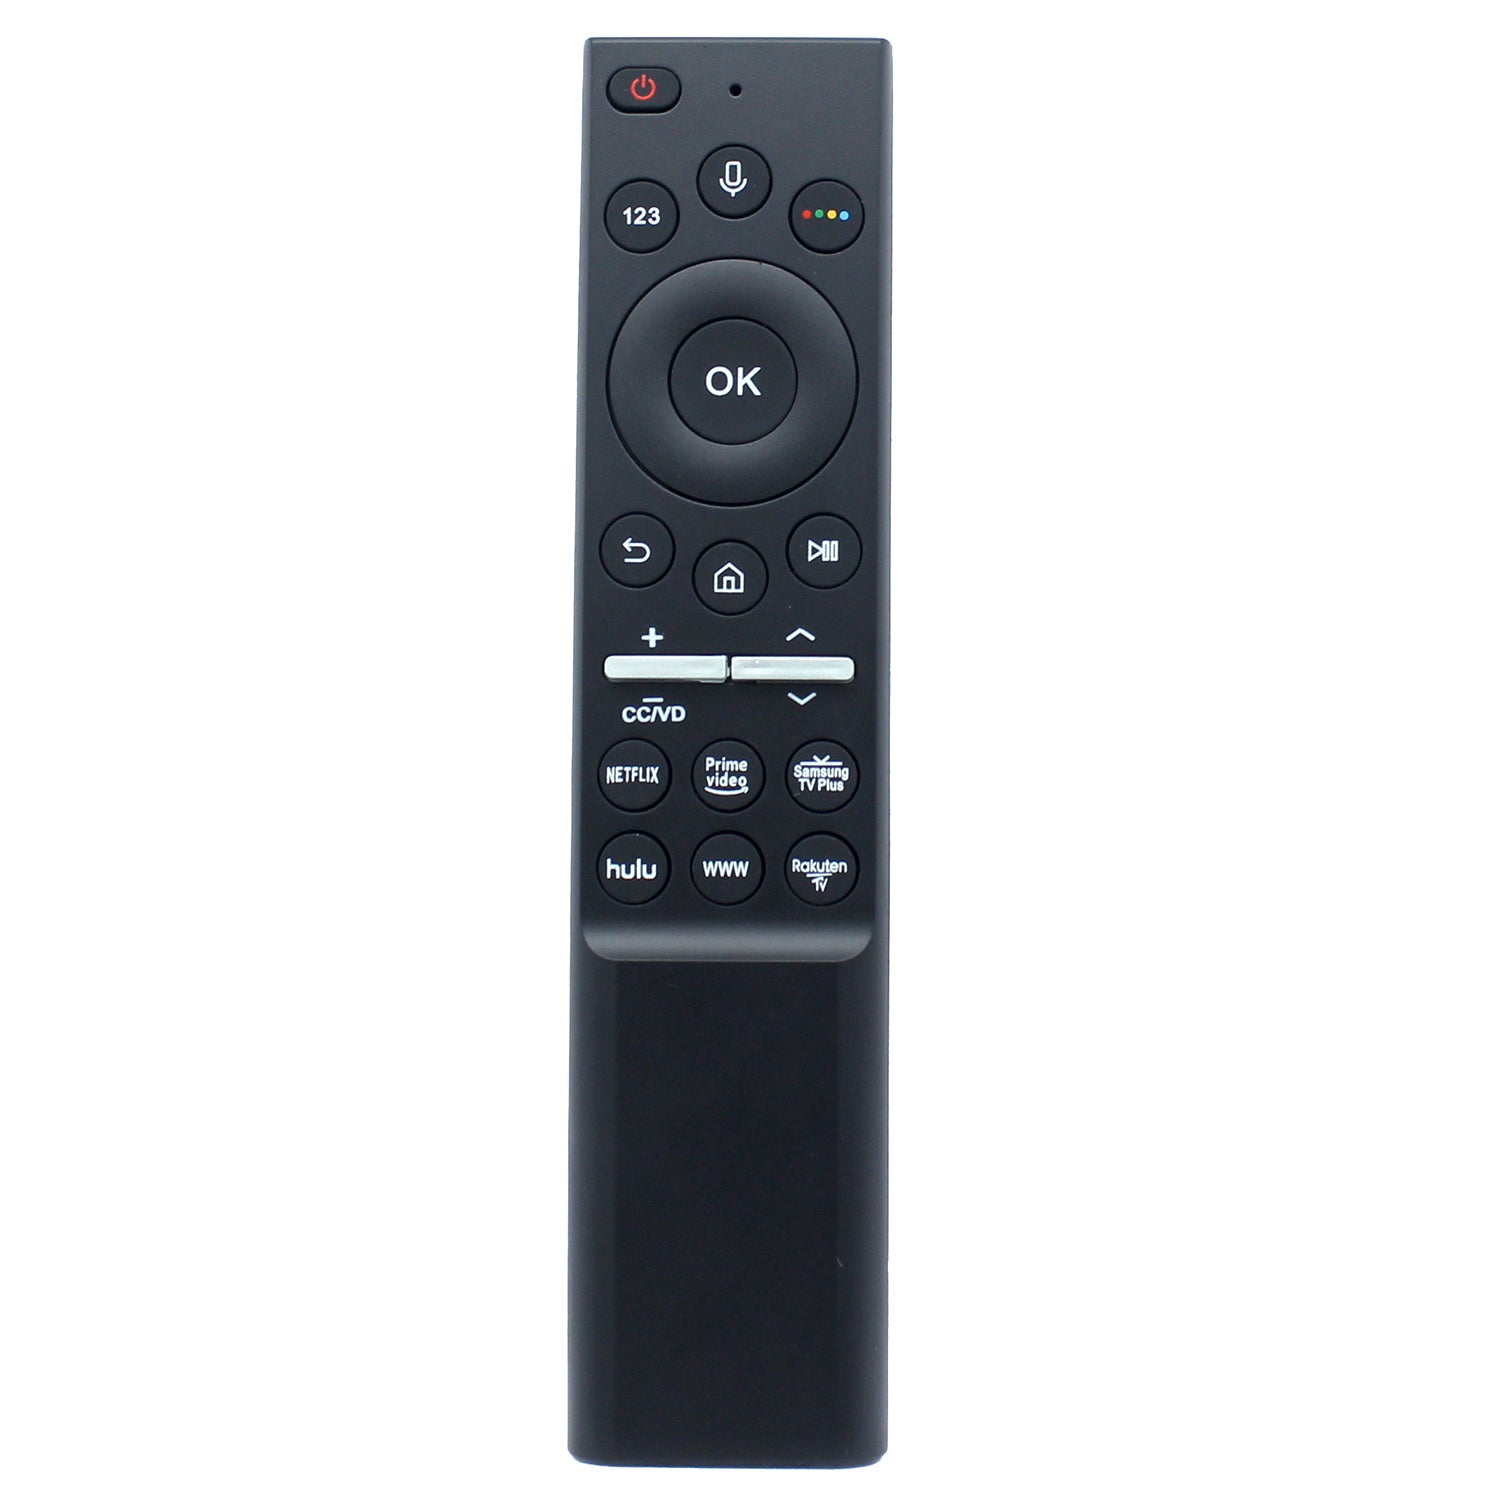 BN59-01329G Voice Remote Control Replacement For Samsung Smart LED TV